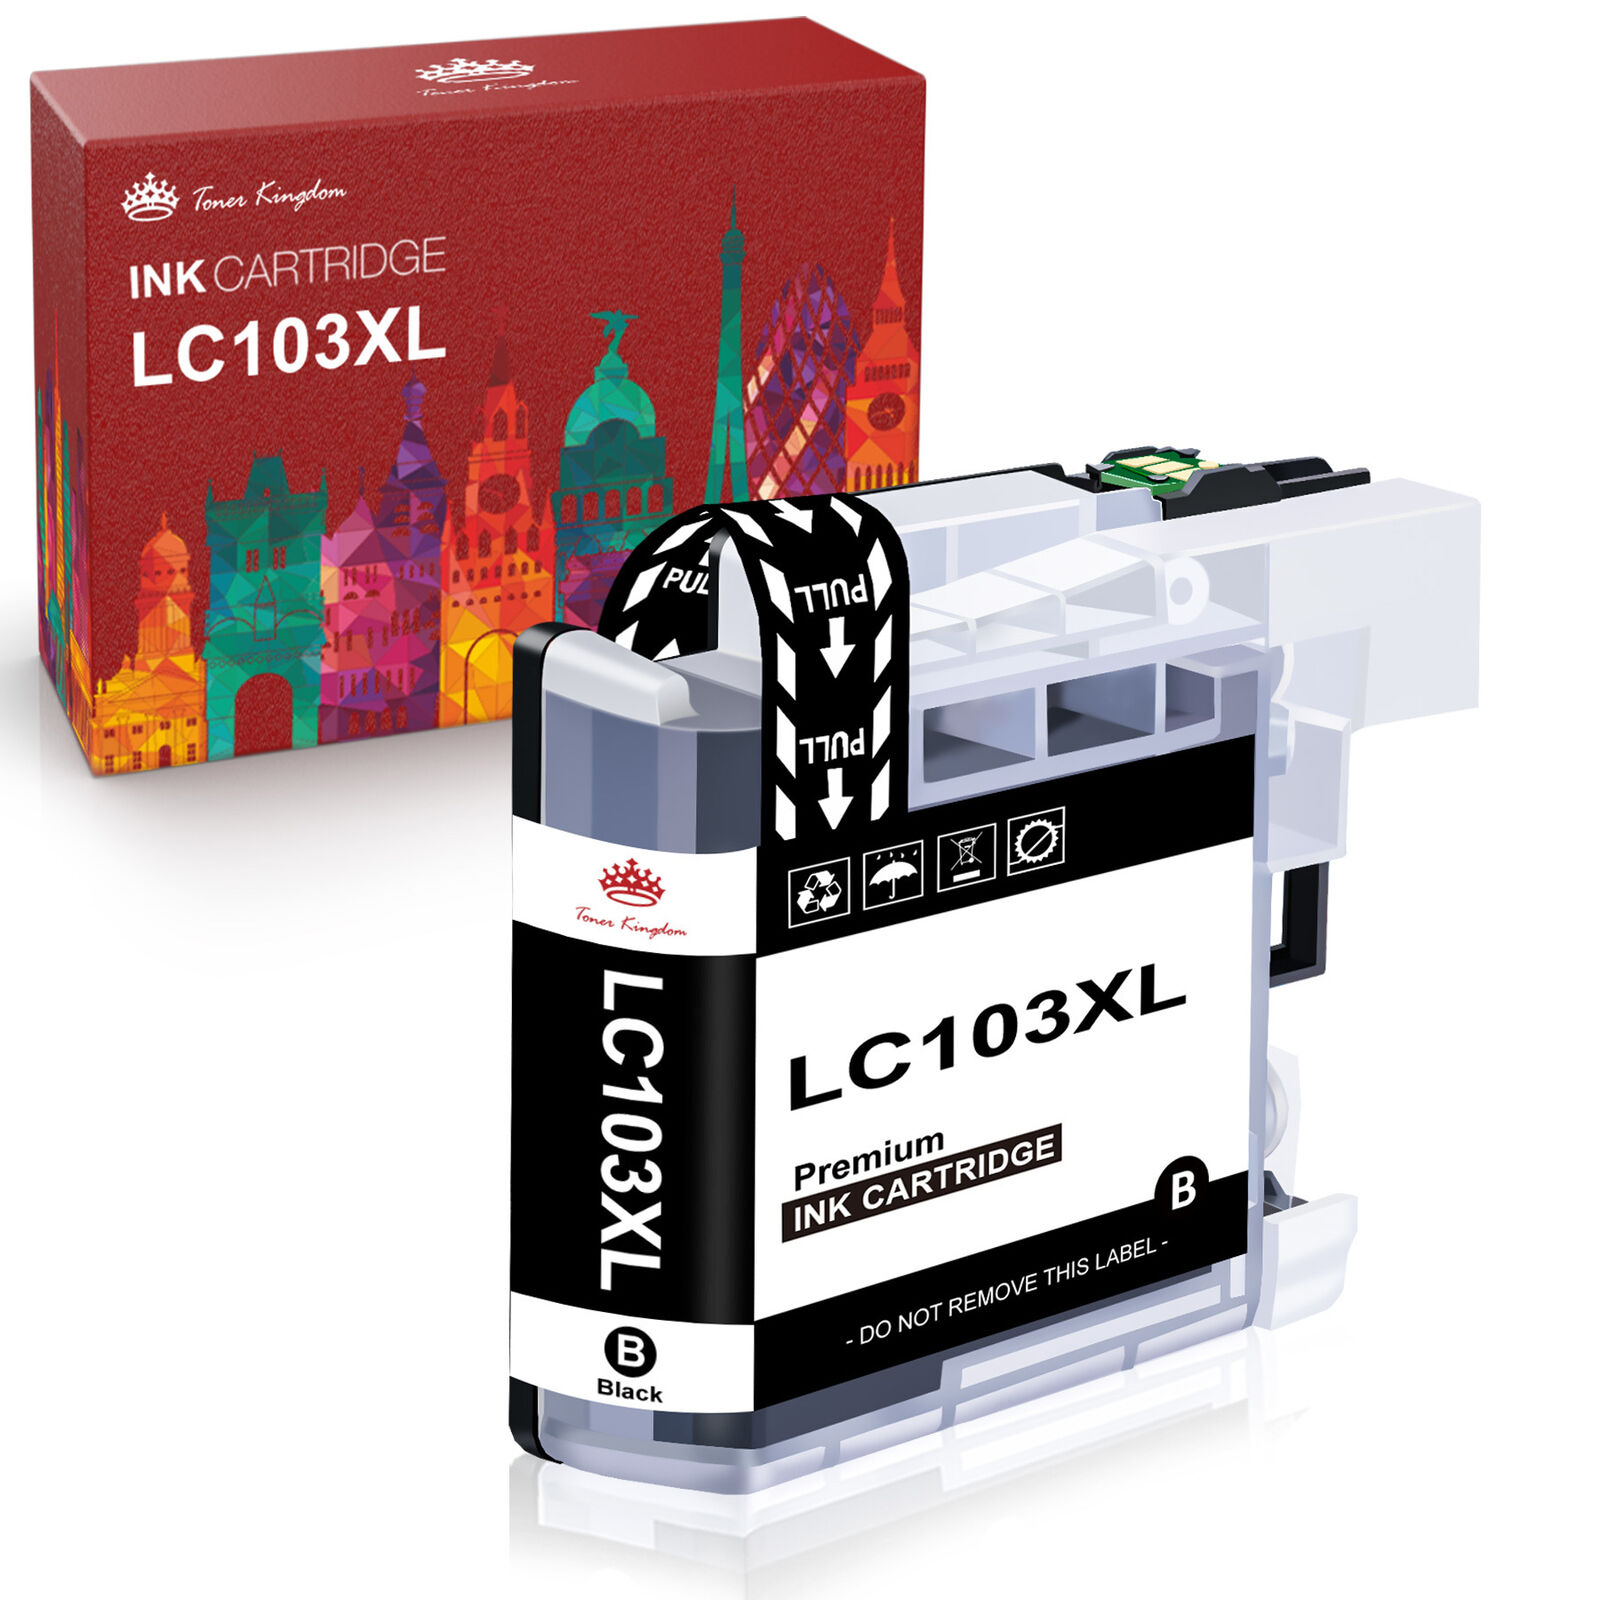 Replacement Ink for Brother LC103 LC101 XL MFC-J470DW MFC-J475DW MFC-J870DW lot